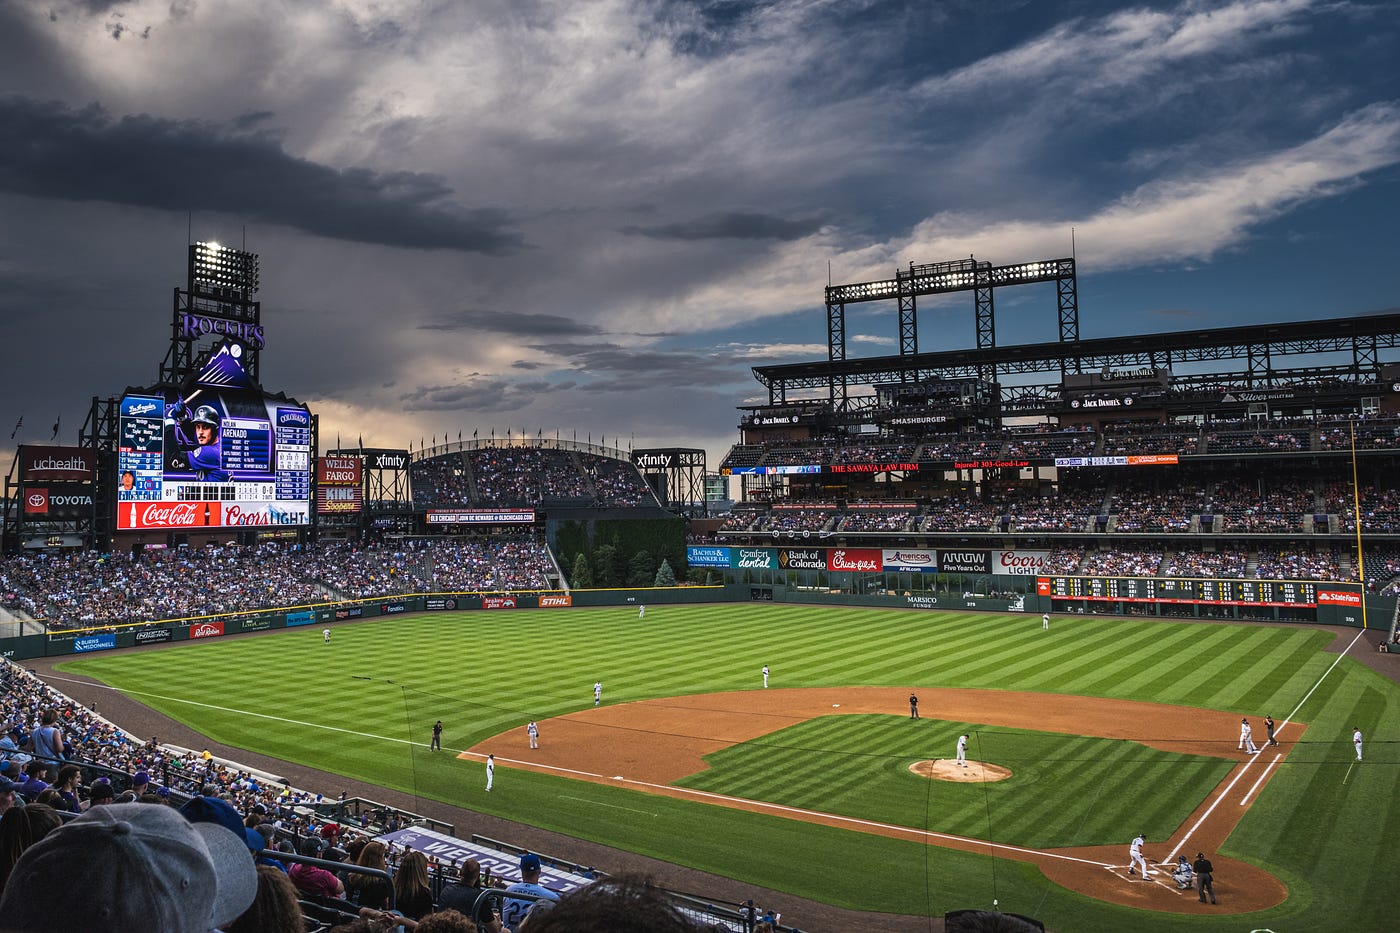 The Coors Field Problem. Why Coors Field is Bad for Baseball, by Jeremiah  Wilson, SportsRaid